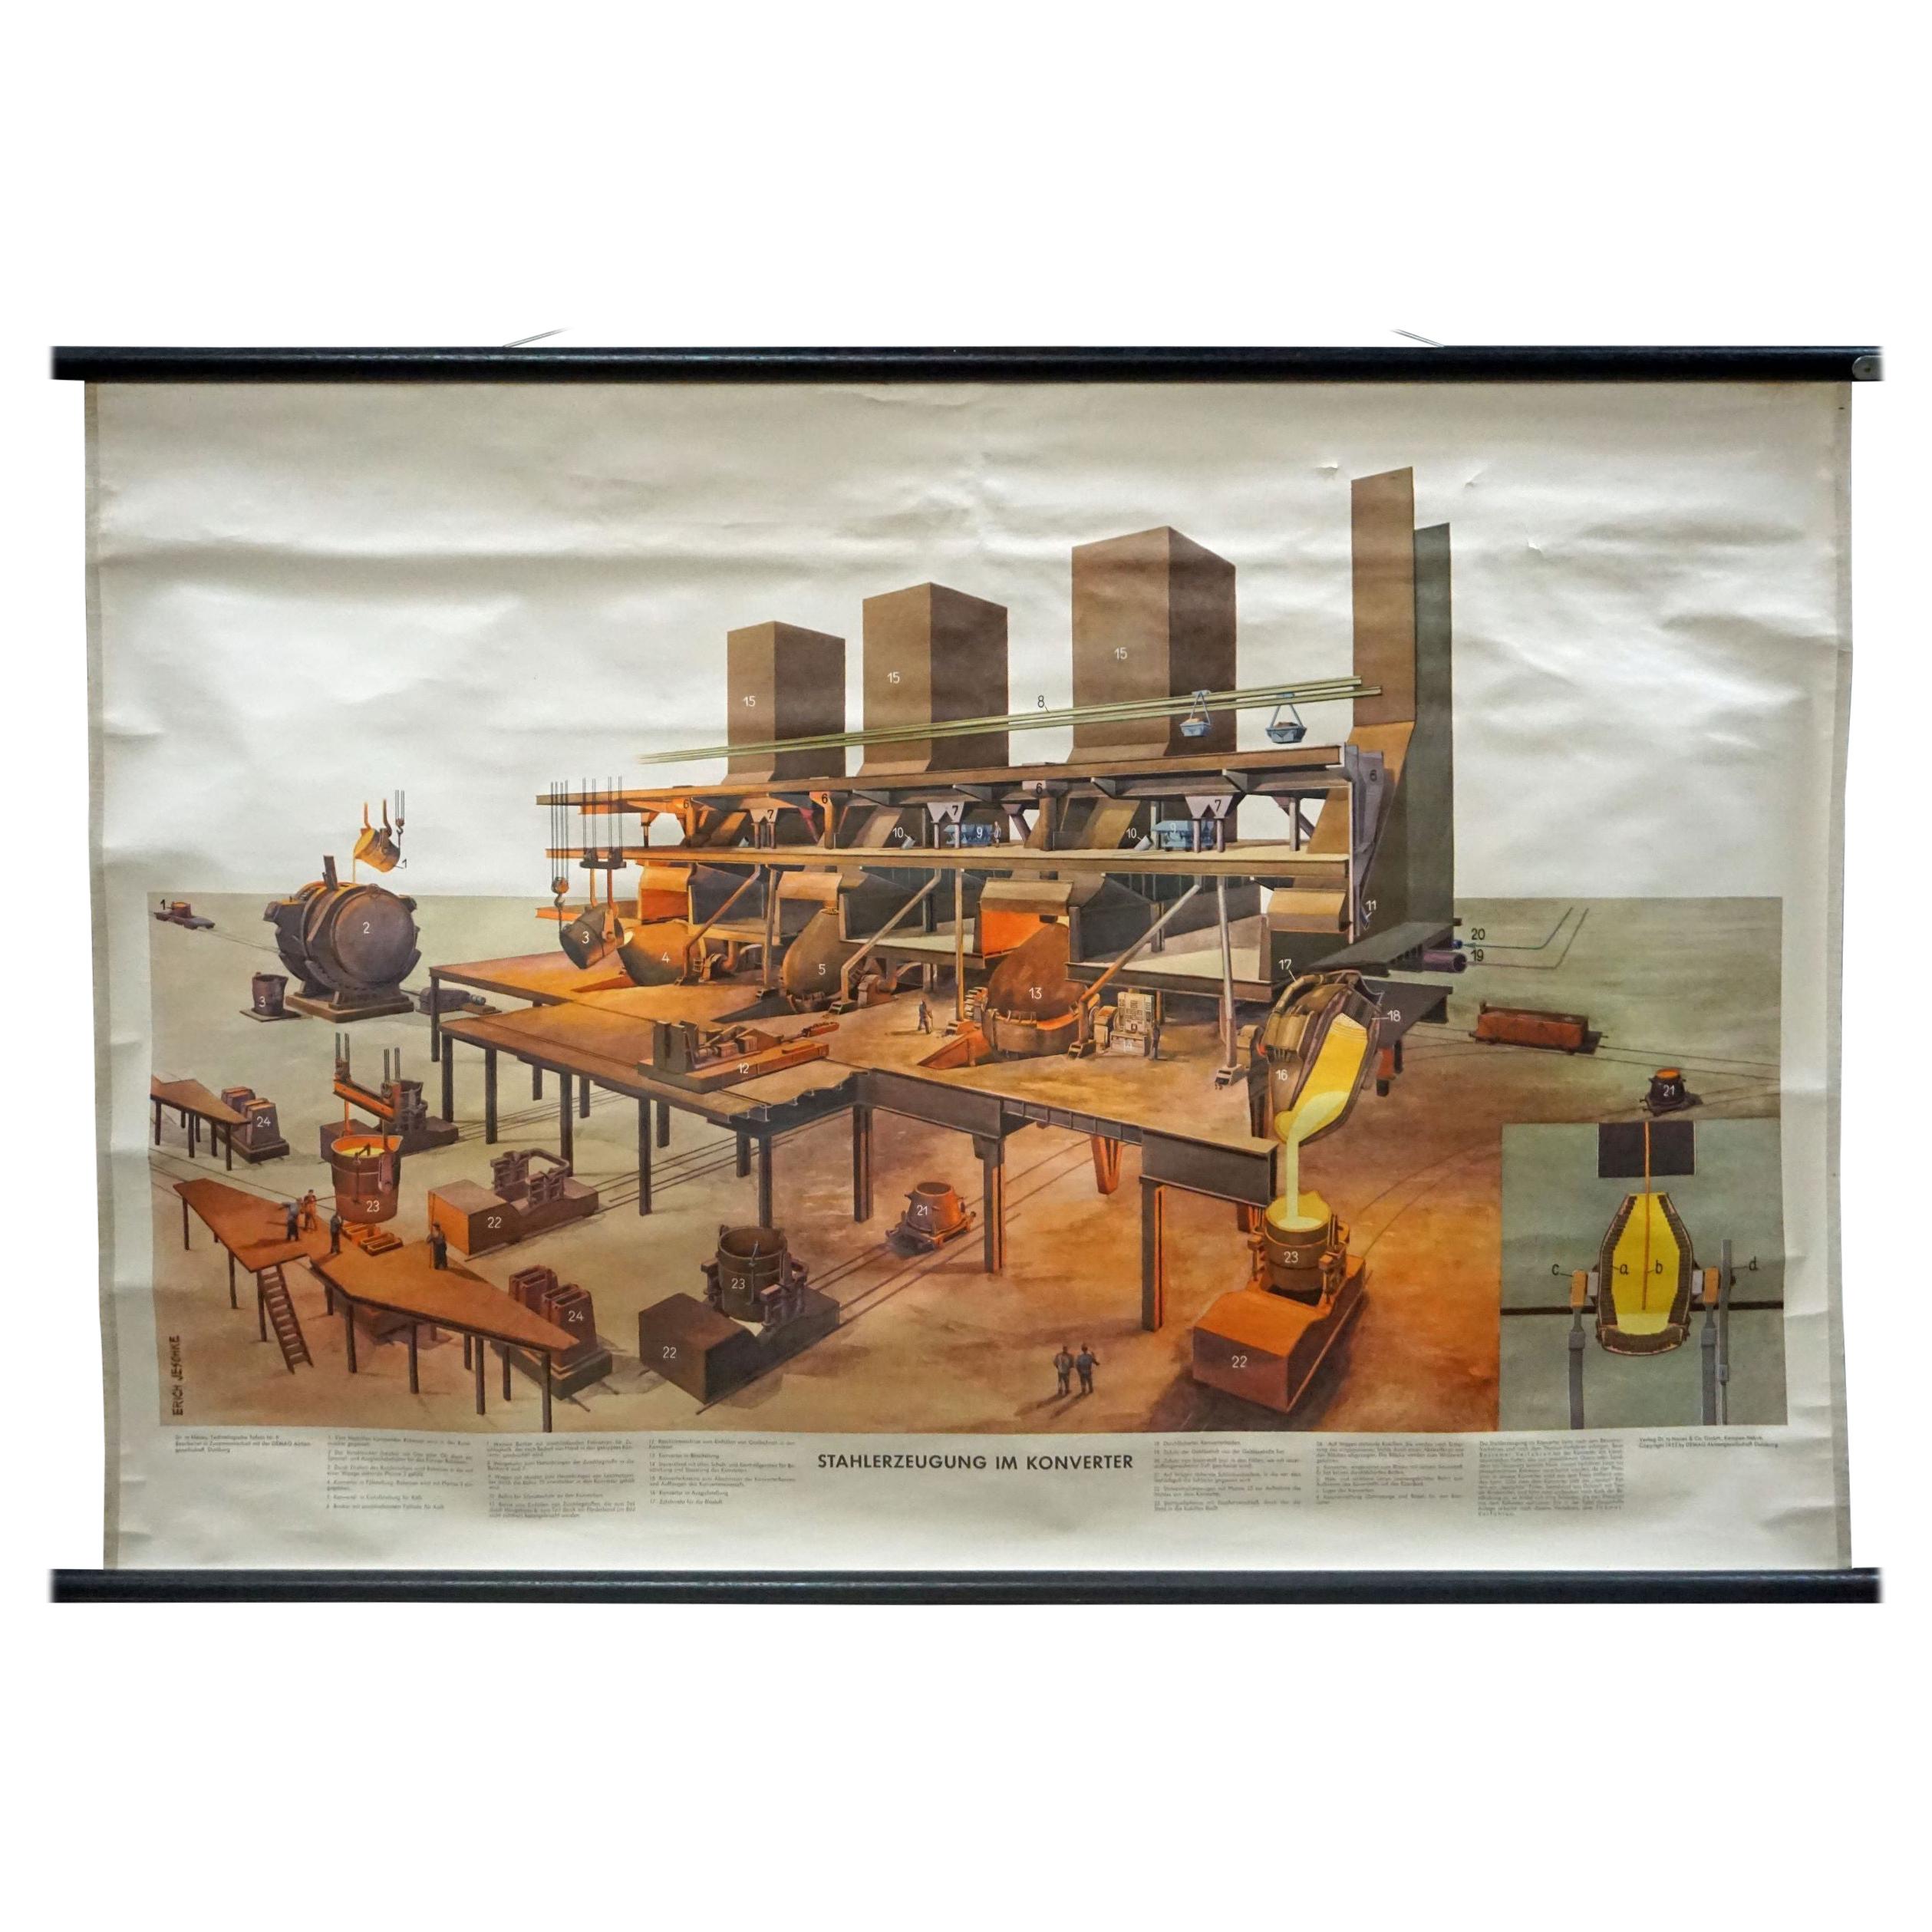 Steel Manufacture in a Converter Rollable Wall Chart Poster